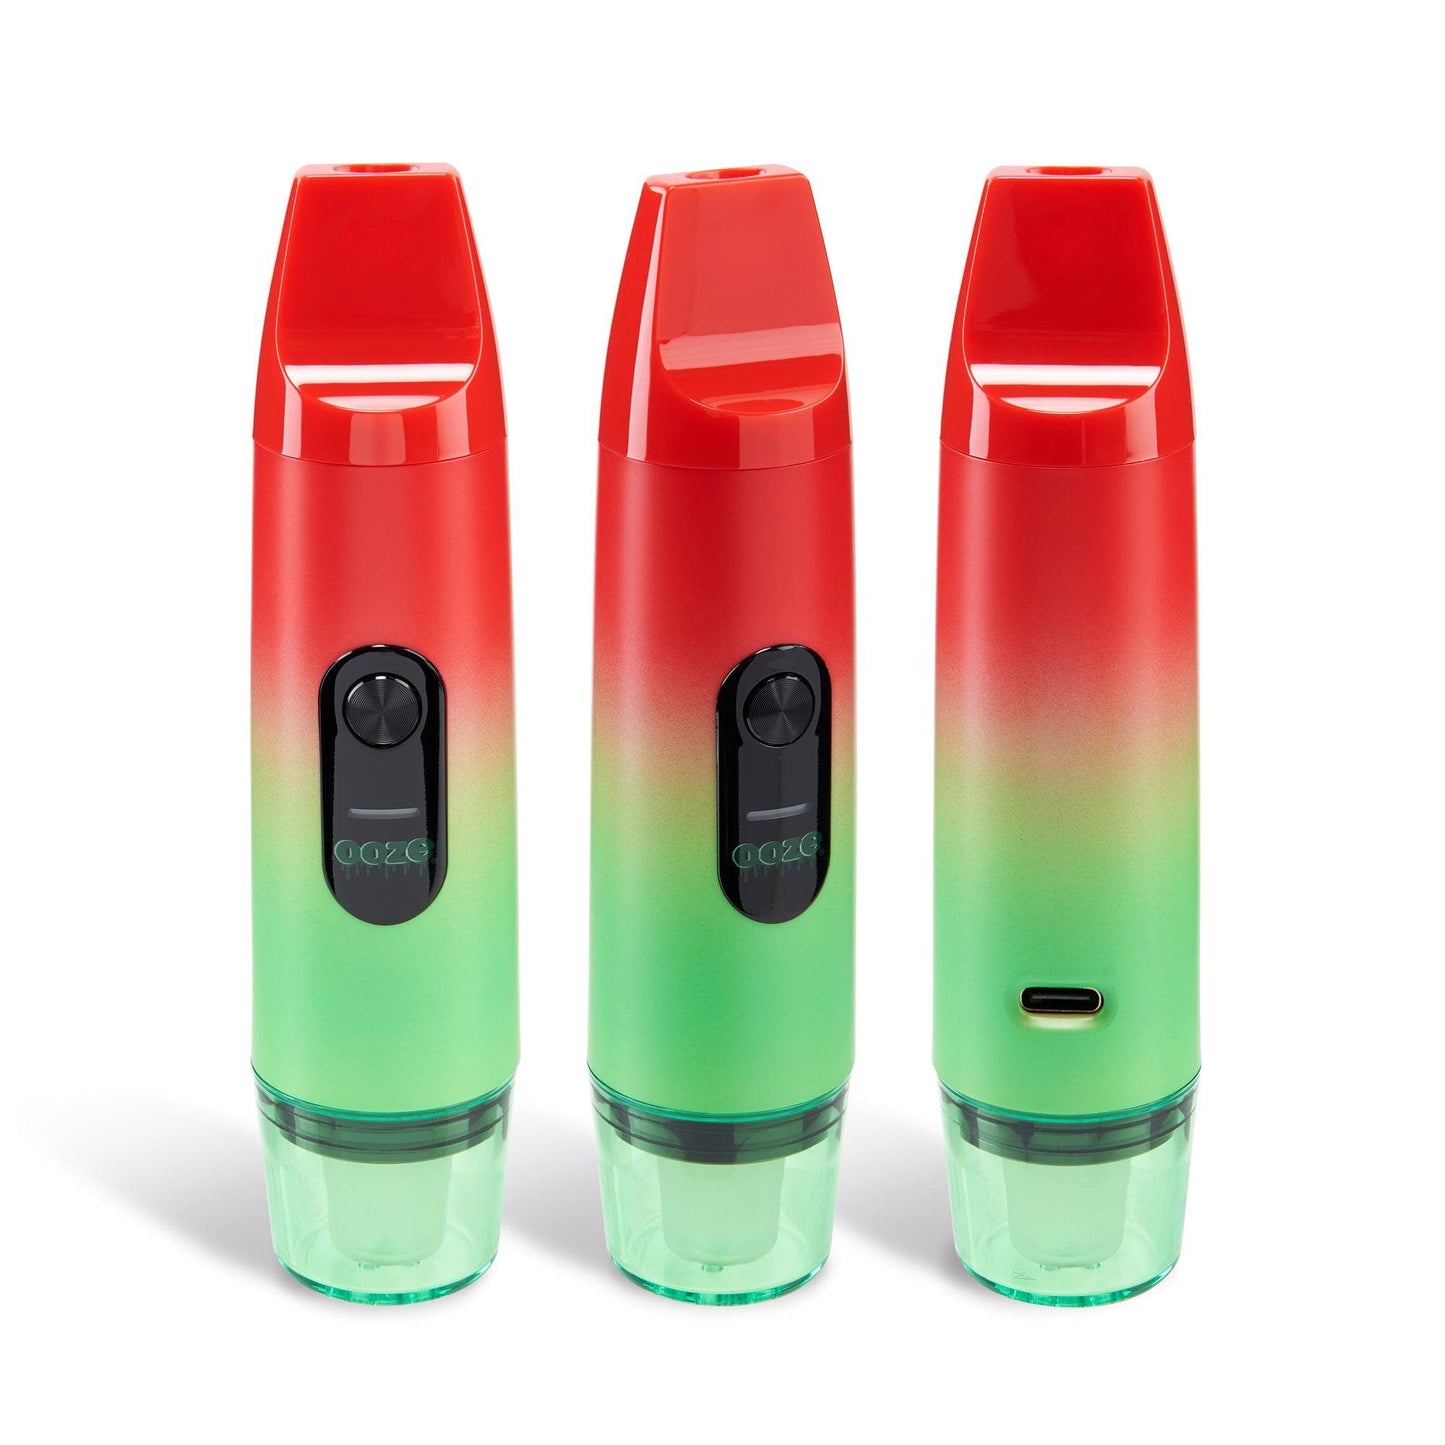 Ooze Batteries and Vapes Ooze Booster Extract Vaporizer – C-Core 1100 mAh